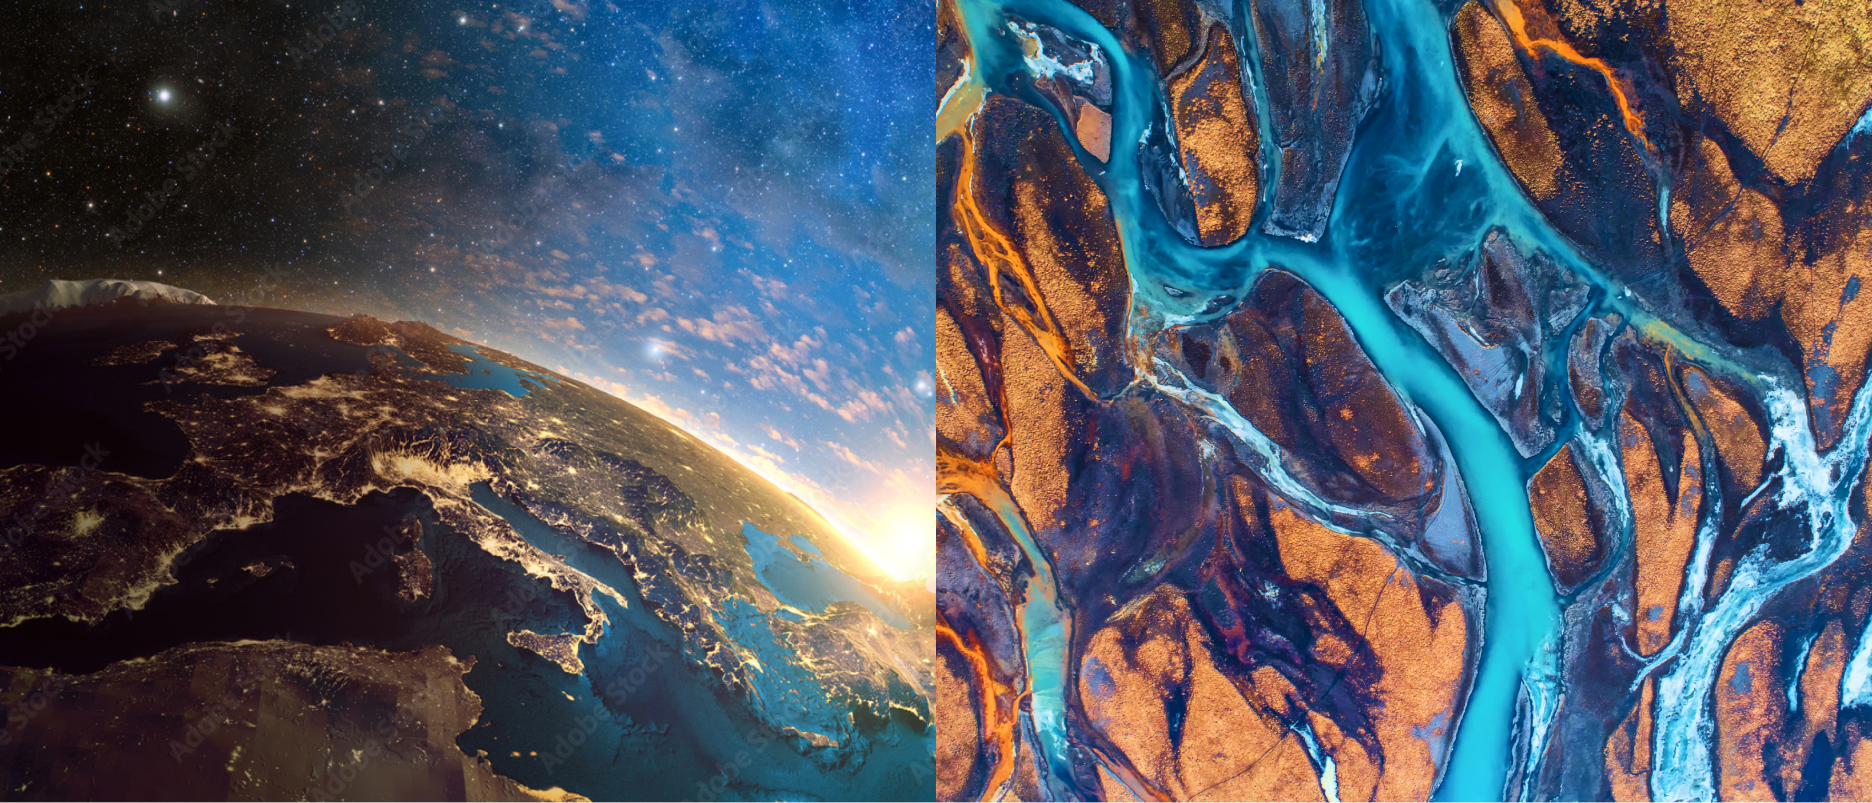 A collage with one image showing part of the Earth seen from outer space and another aerial image of rust-colored land bisected by many blue waterways